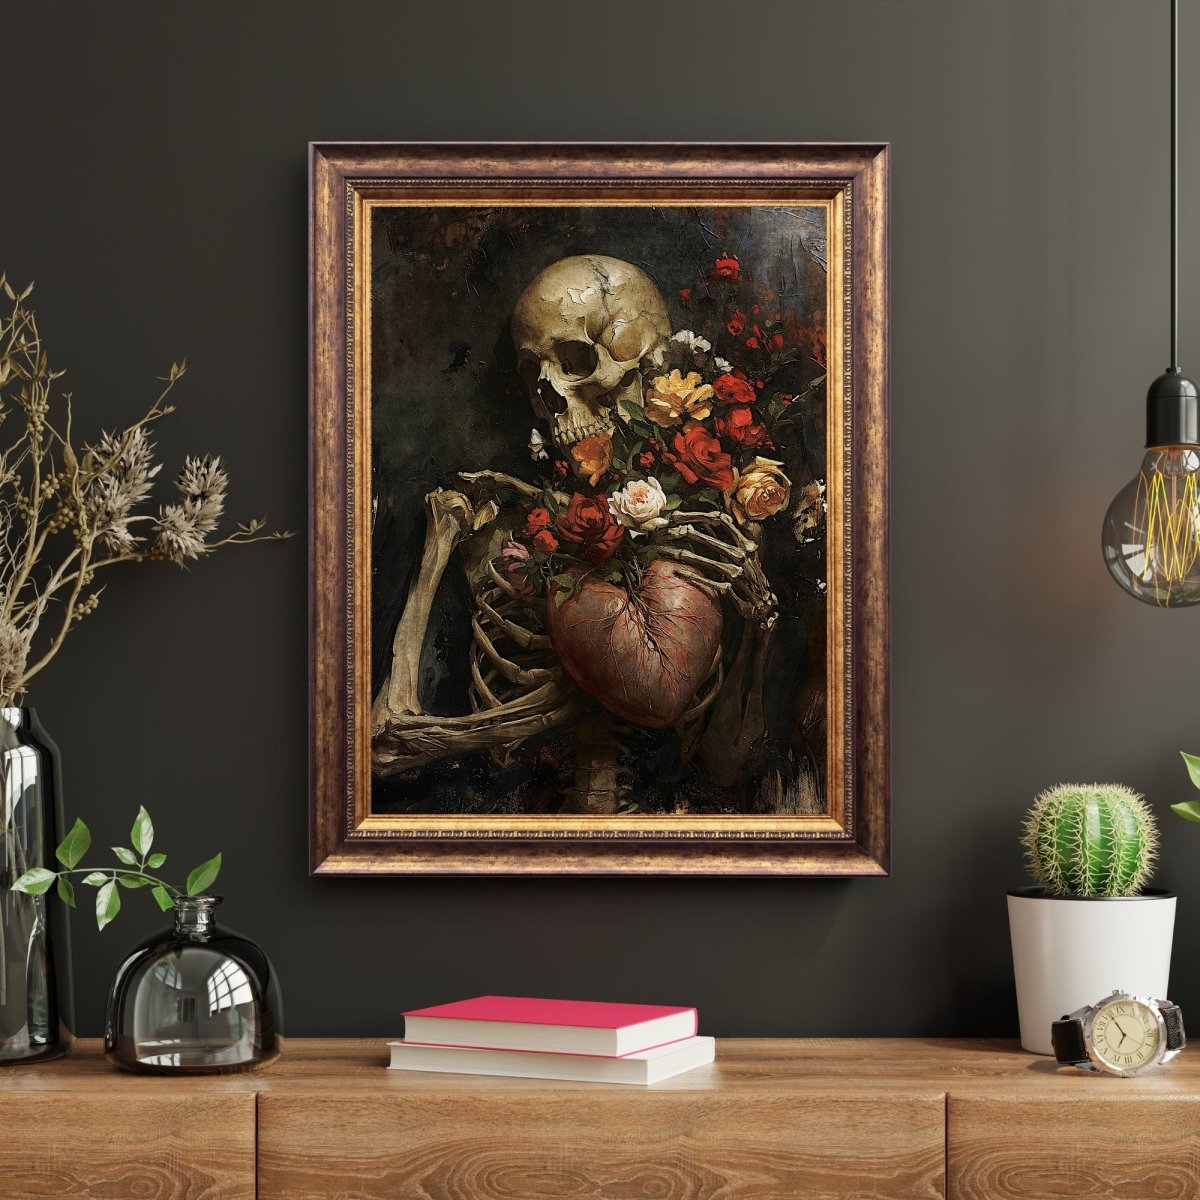 Gothic Valentine Wall Art Antique Skeleton Oil Painting Heart and Roses Dark Gothic Decor Goblincore Decor Dark Romance Print Paper Poster Print - Everything Pixel